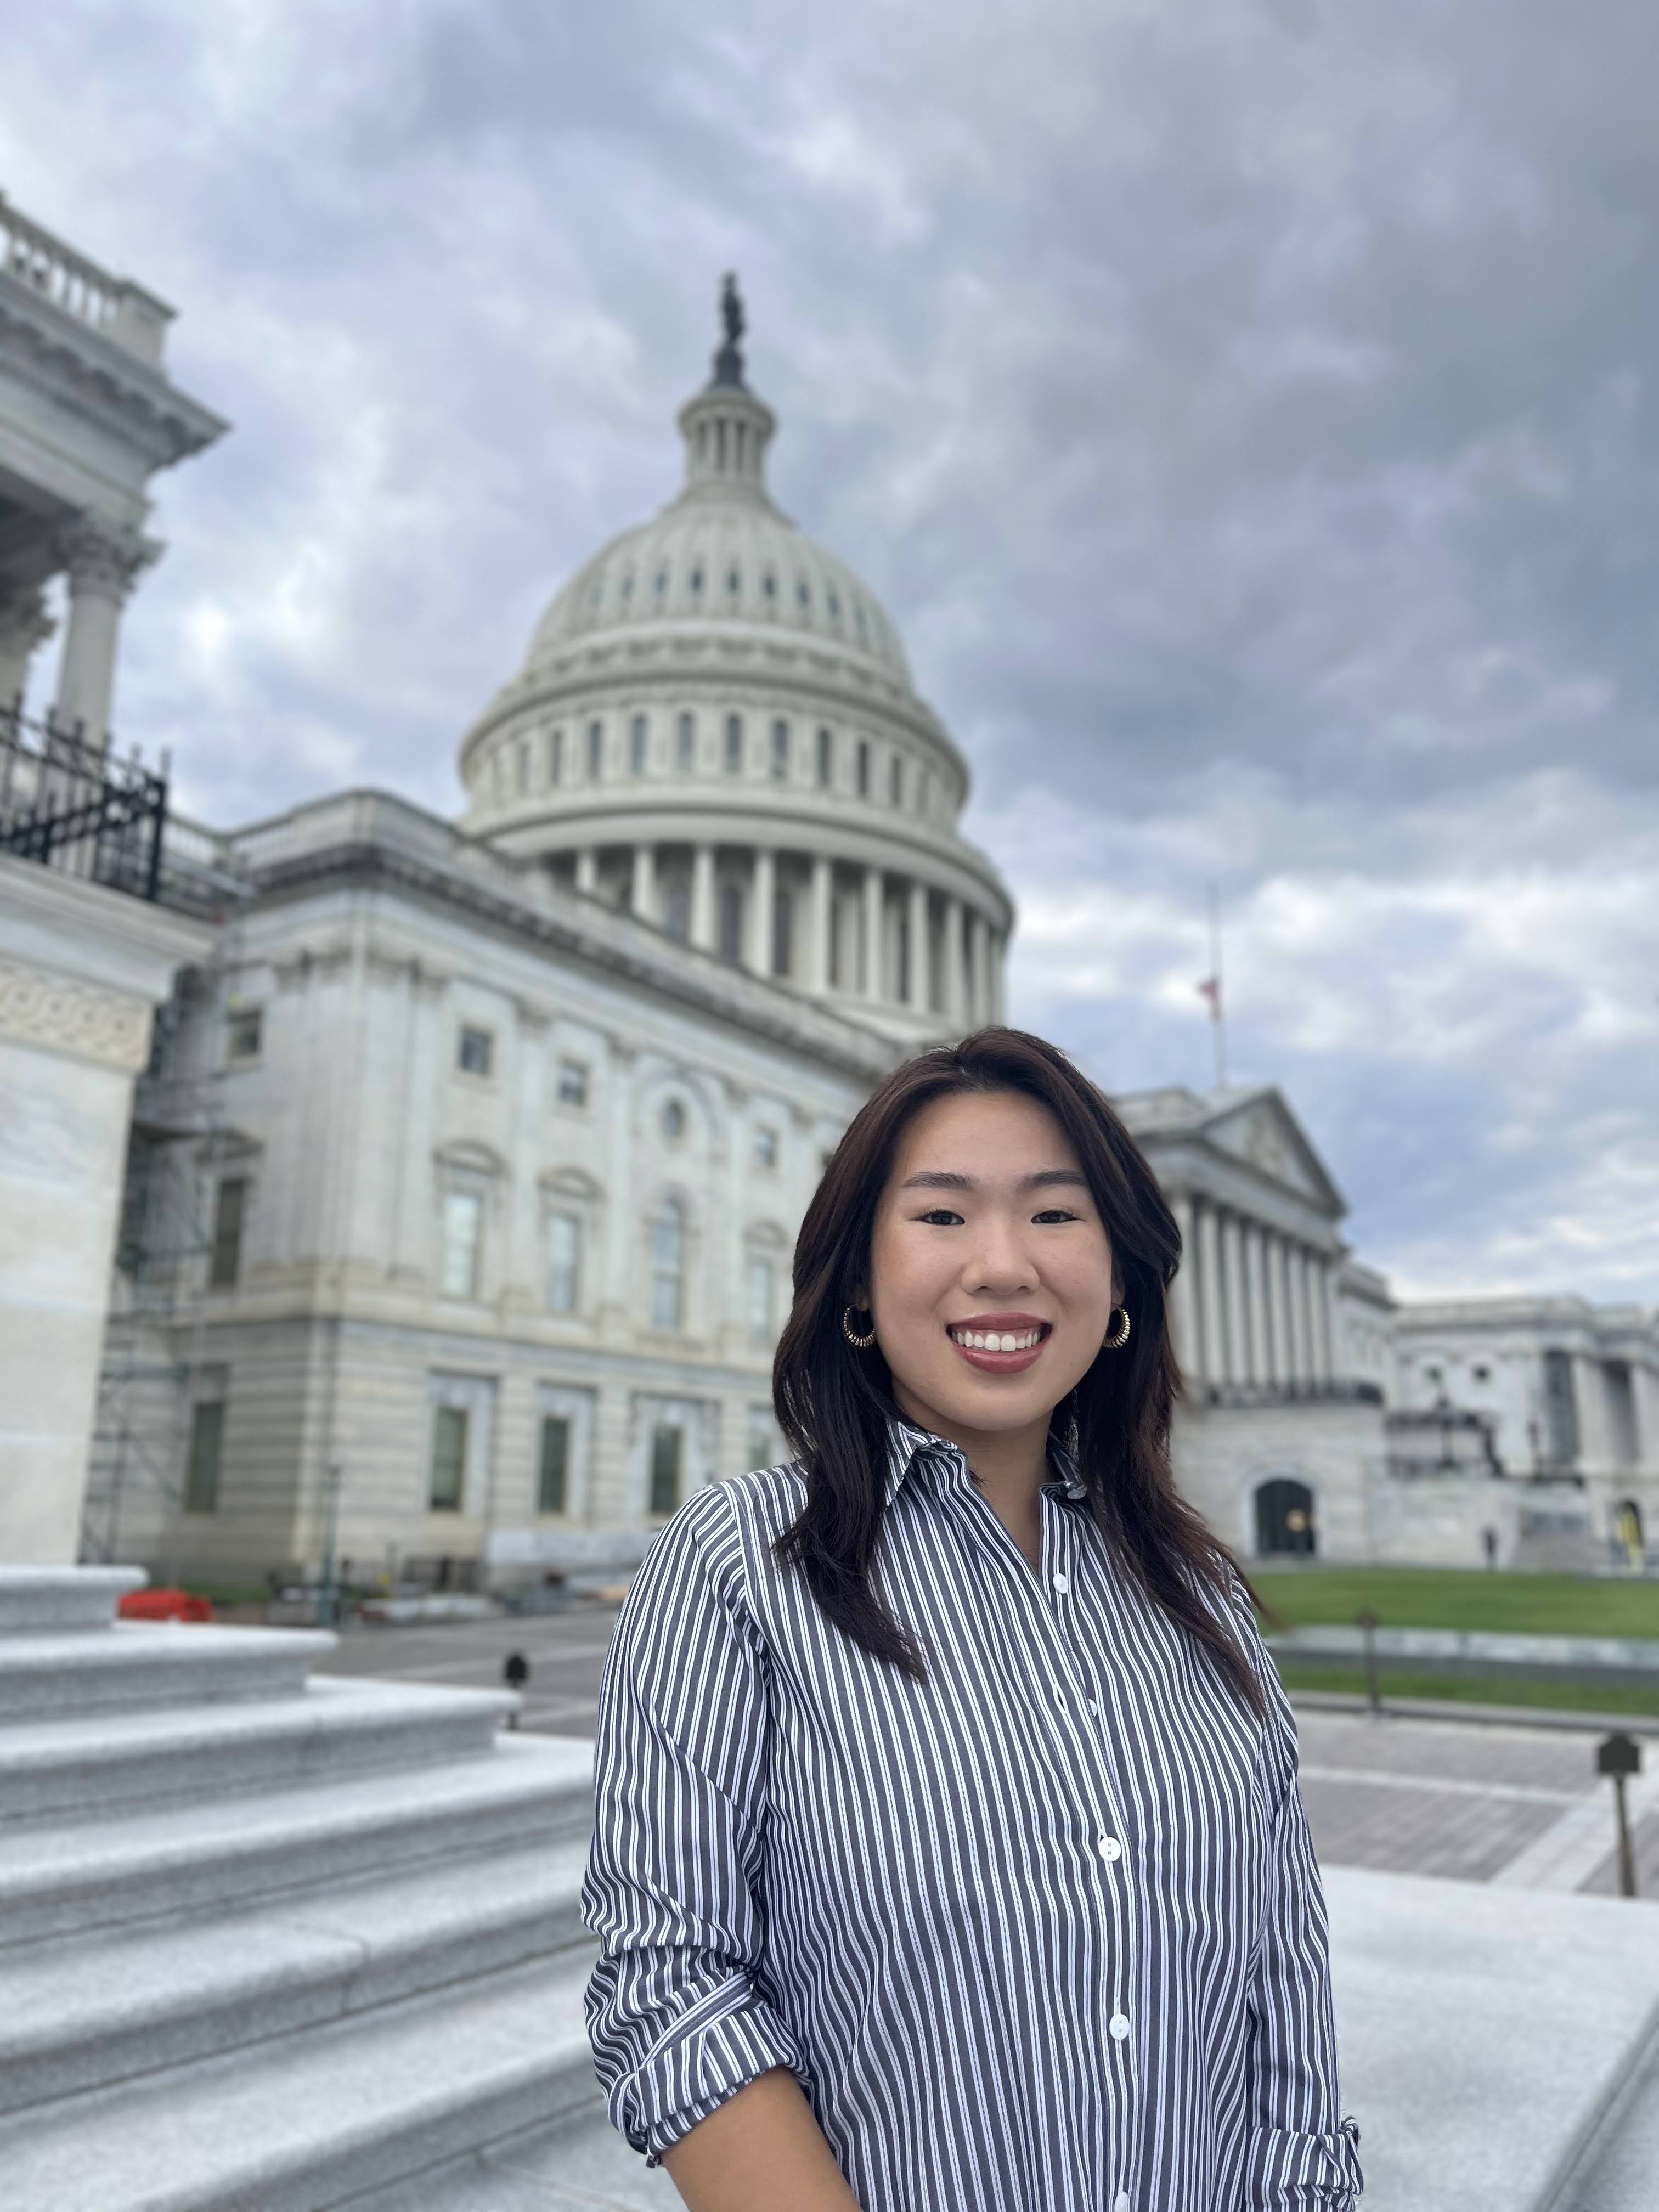 Congratulations to Lily Chang on her position as Staff Assistant/Press Assistant for Rep. John Sarbanes